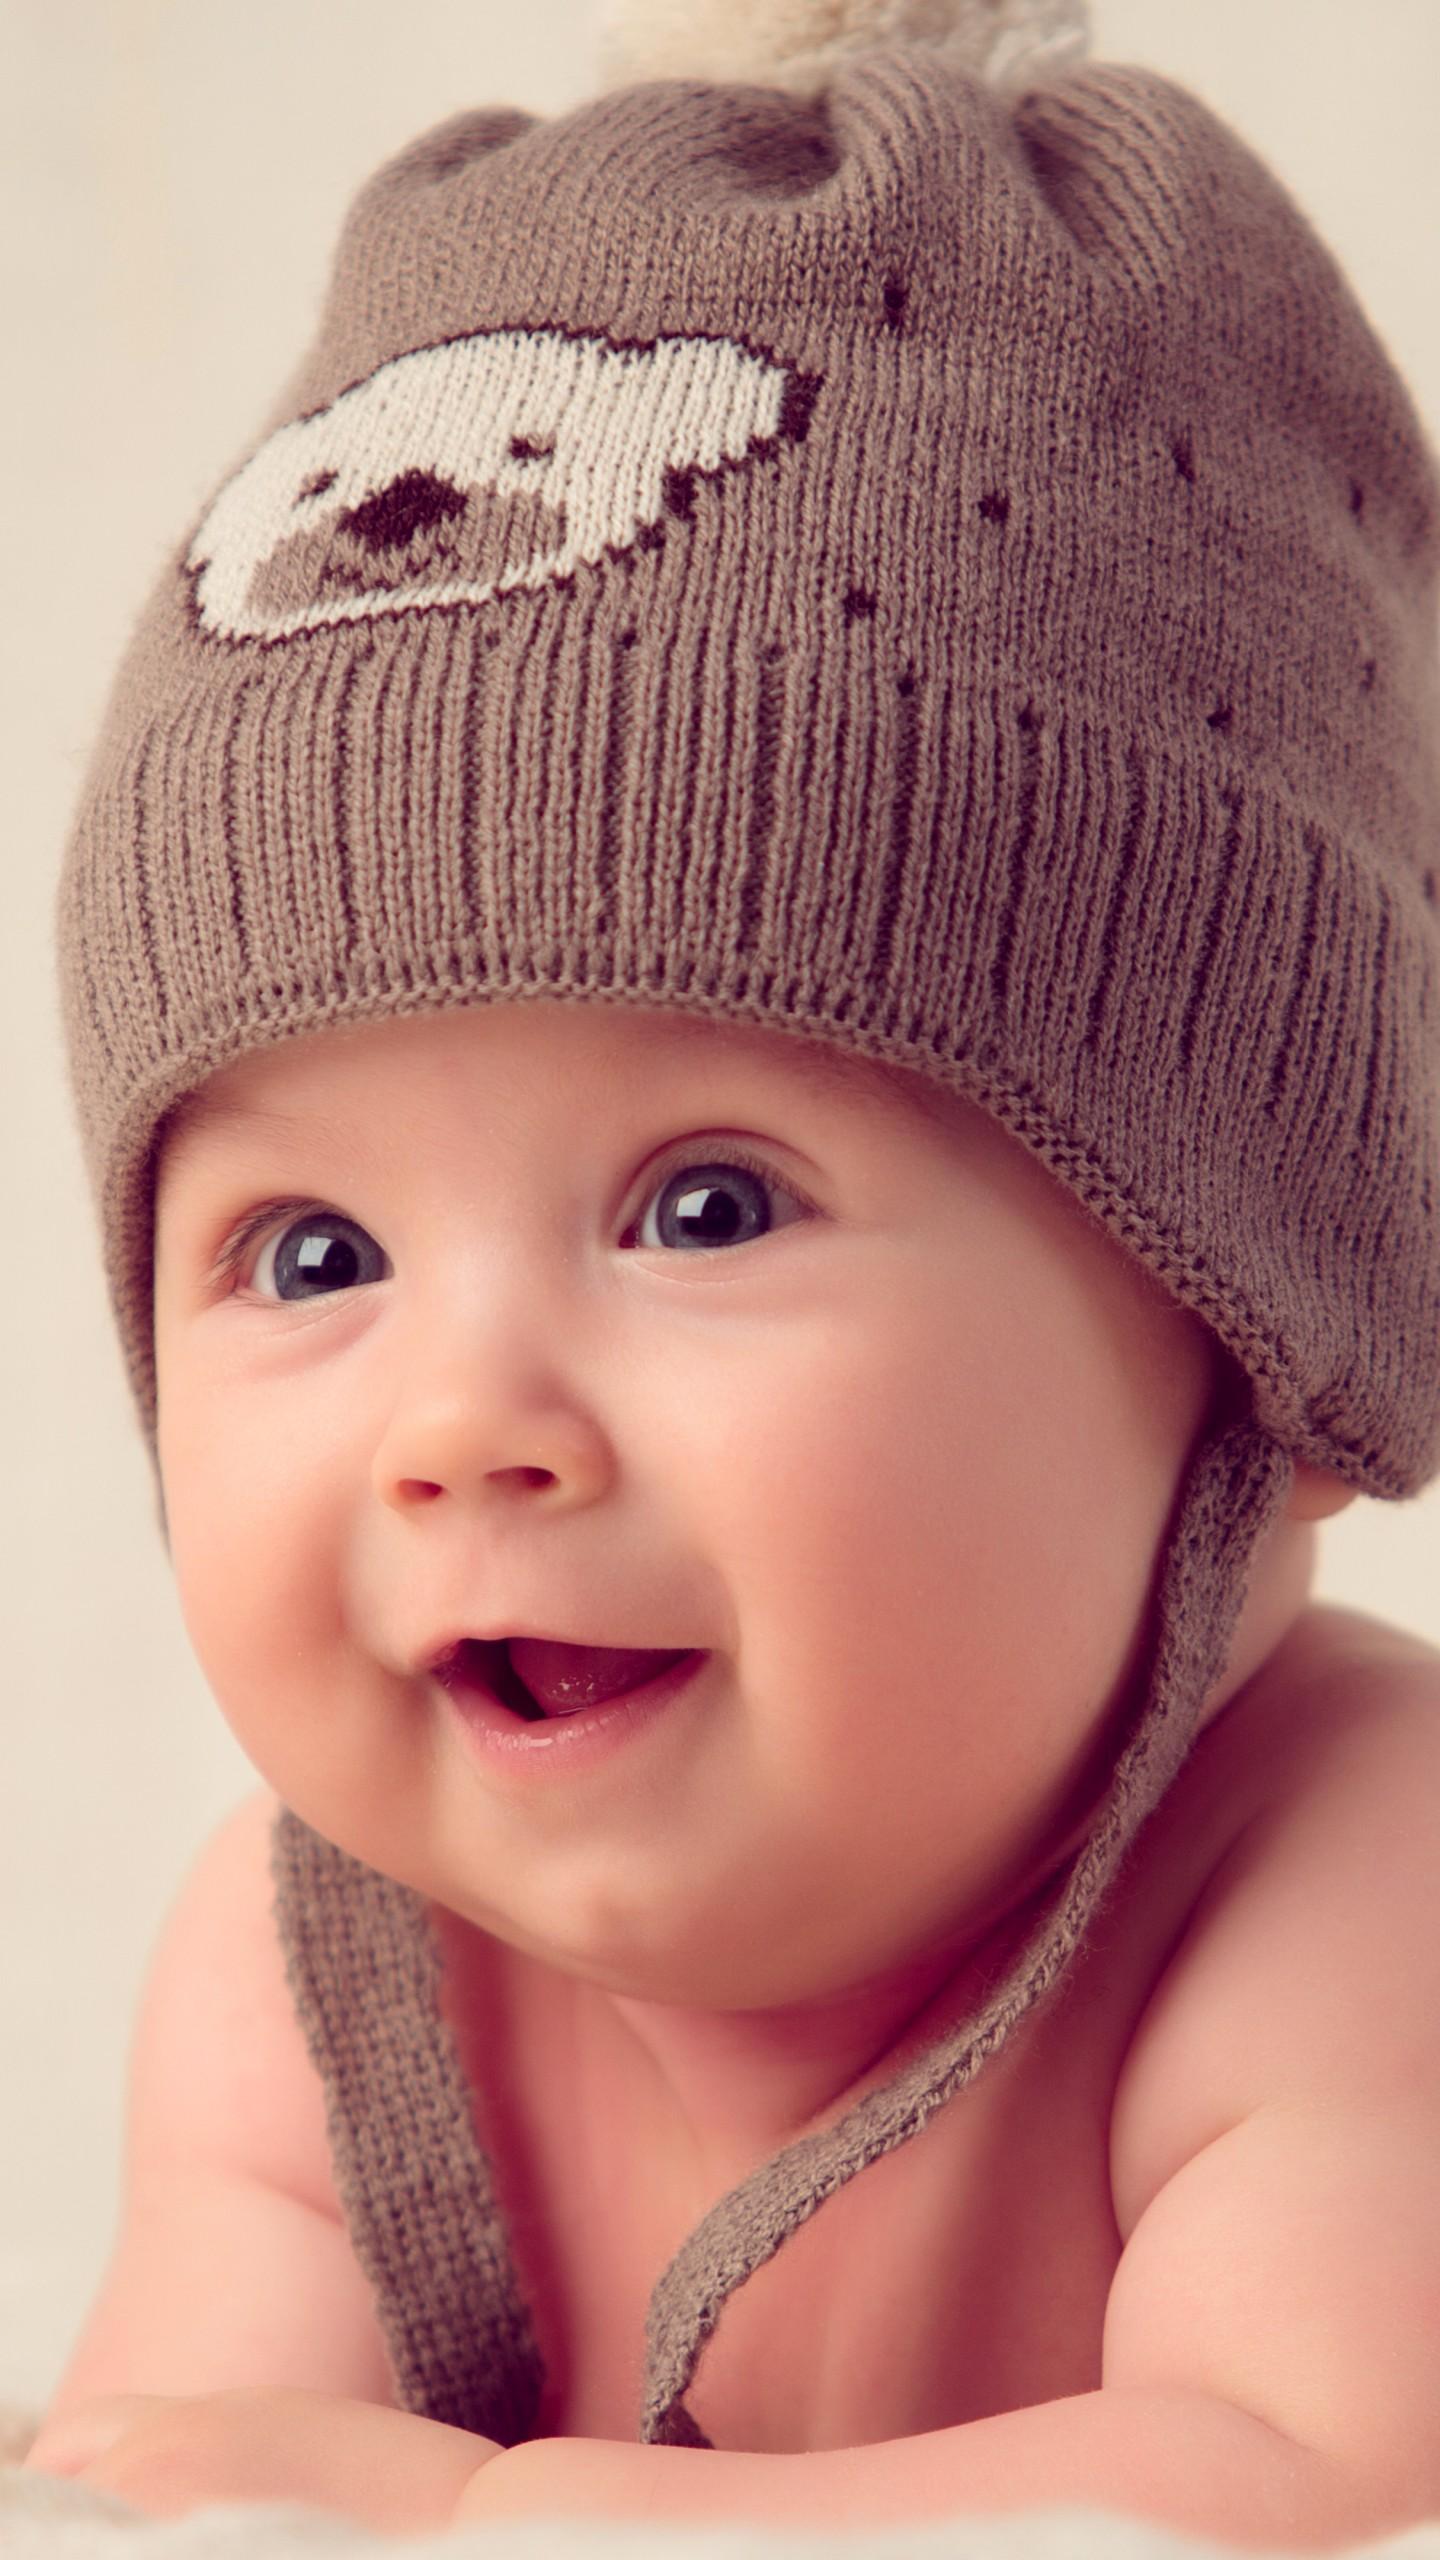 Hd Wallpaper For Mobile Cute Baby